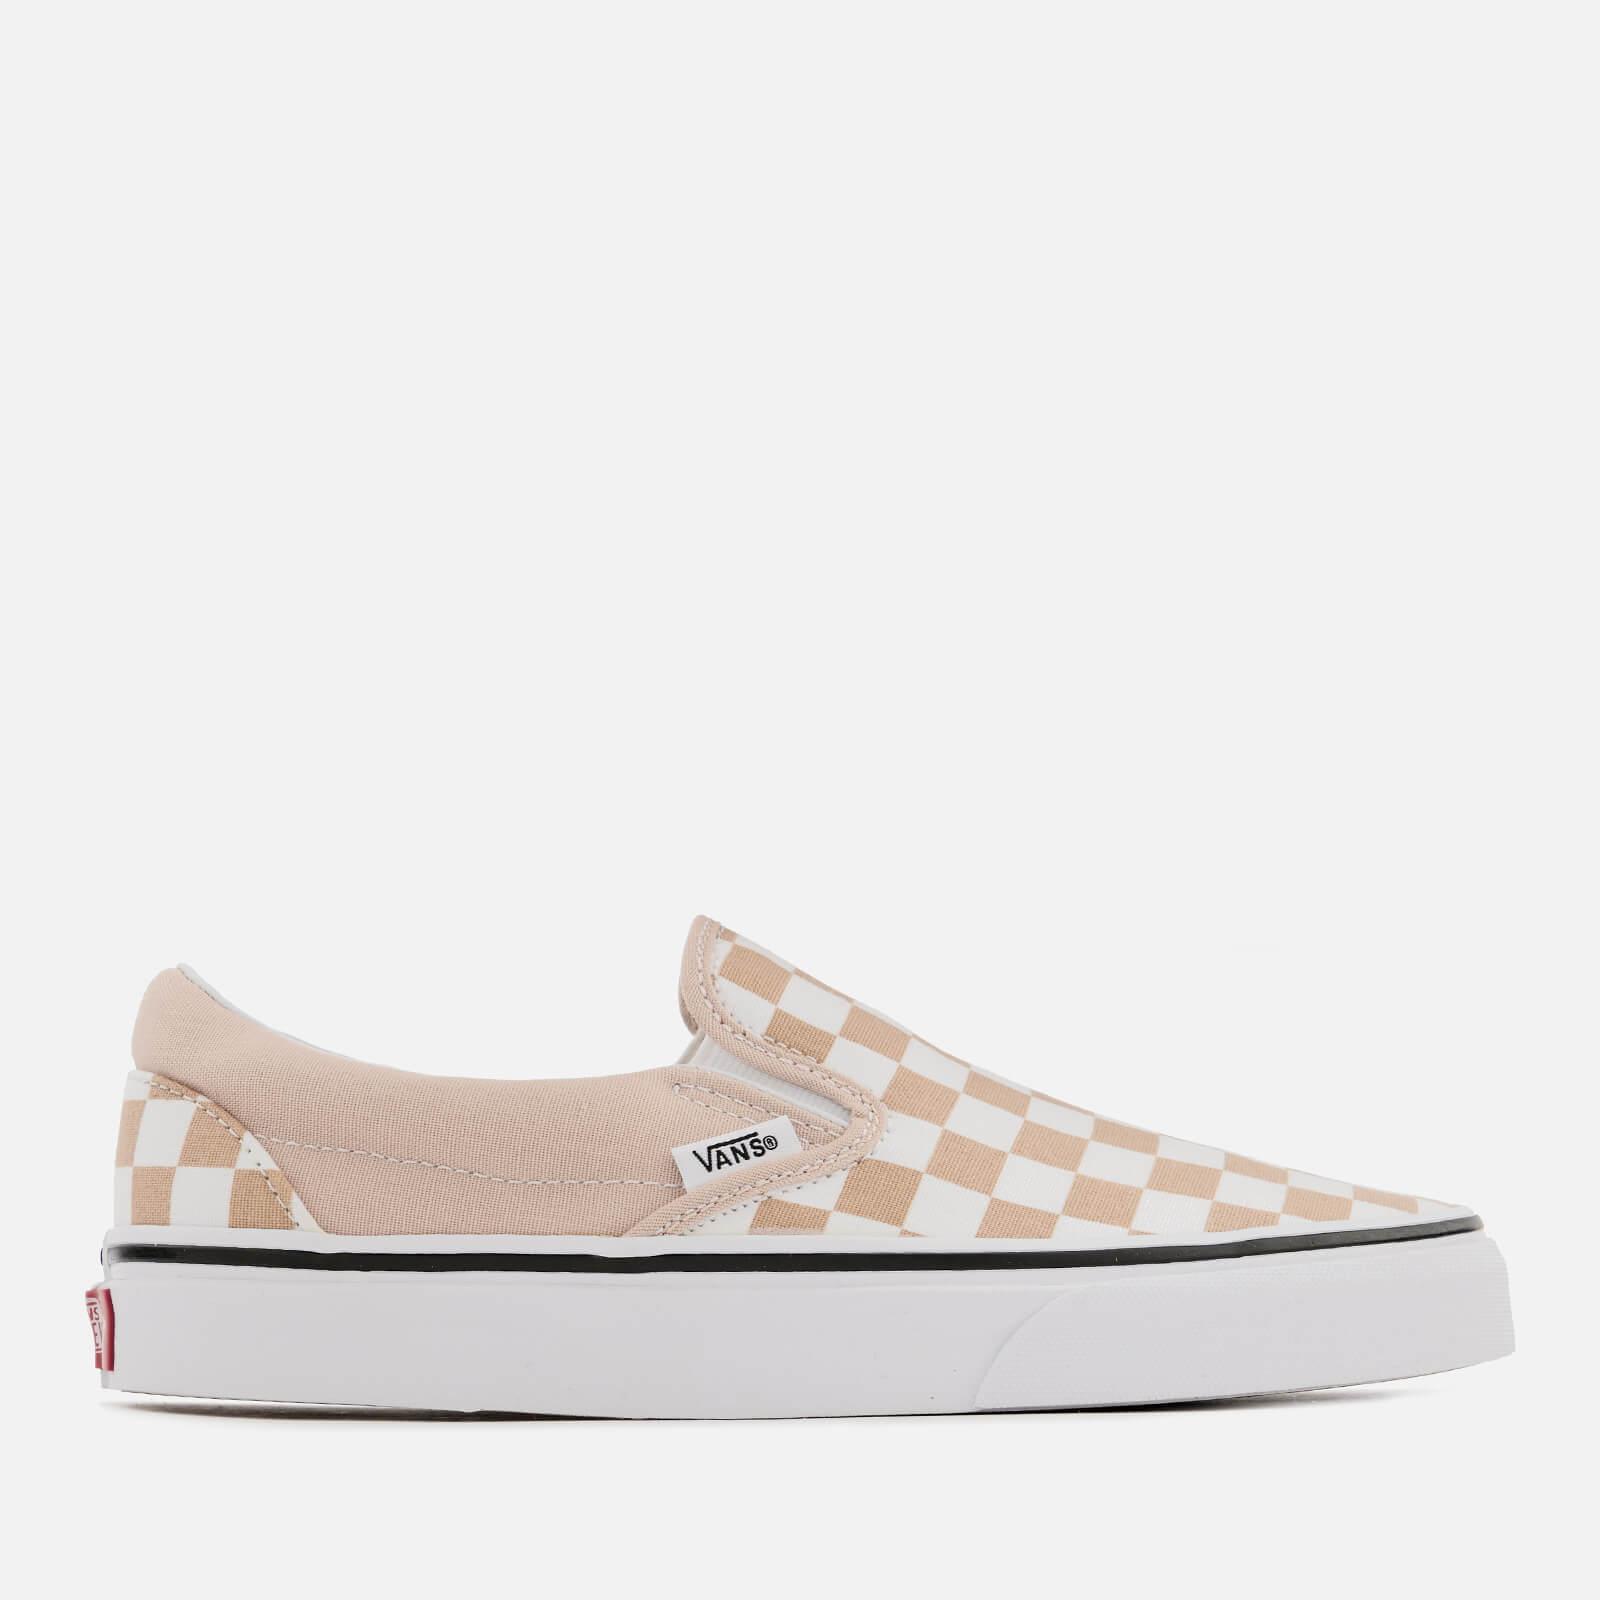 Vans Checkerboard Slip-on Trainers in Natural Lyst